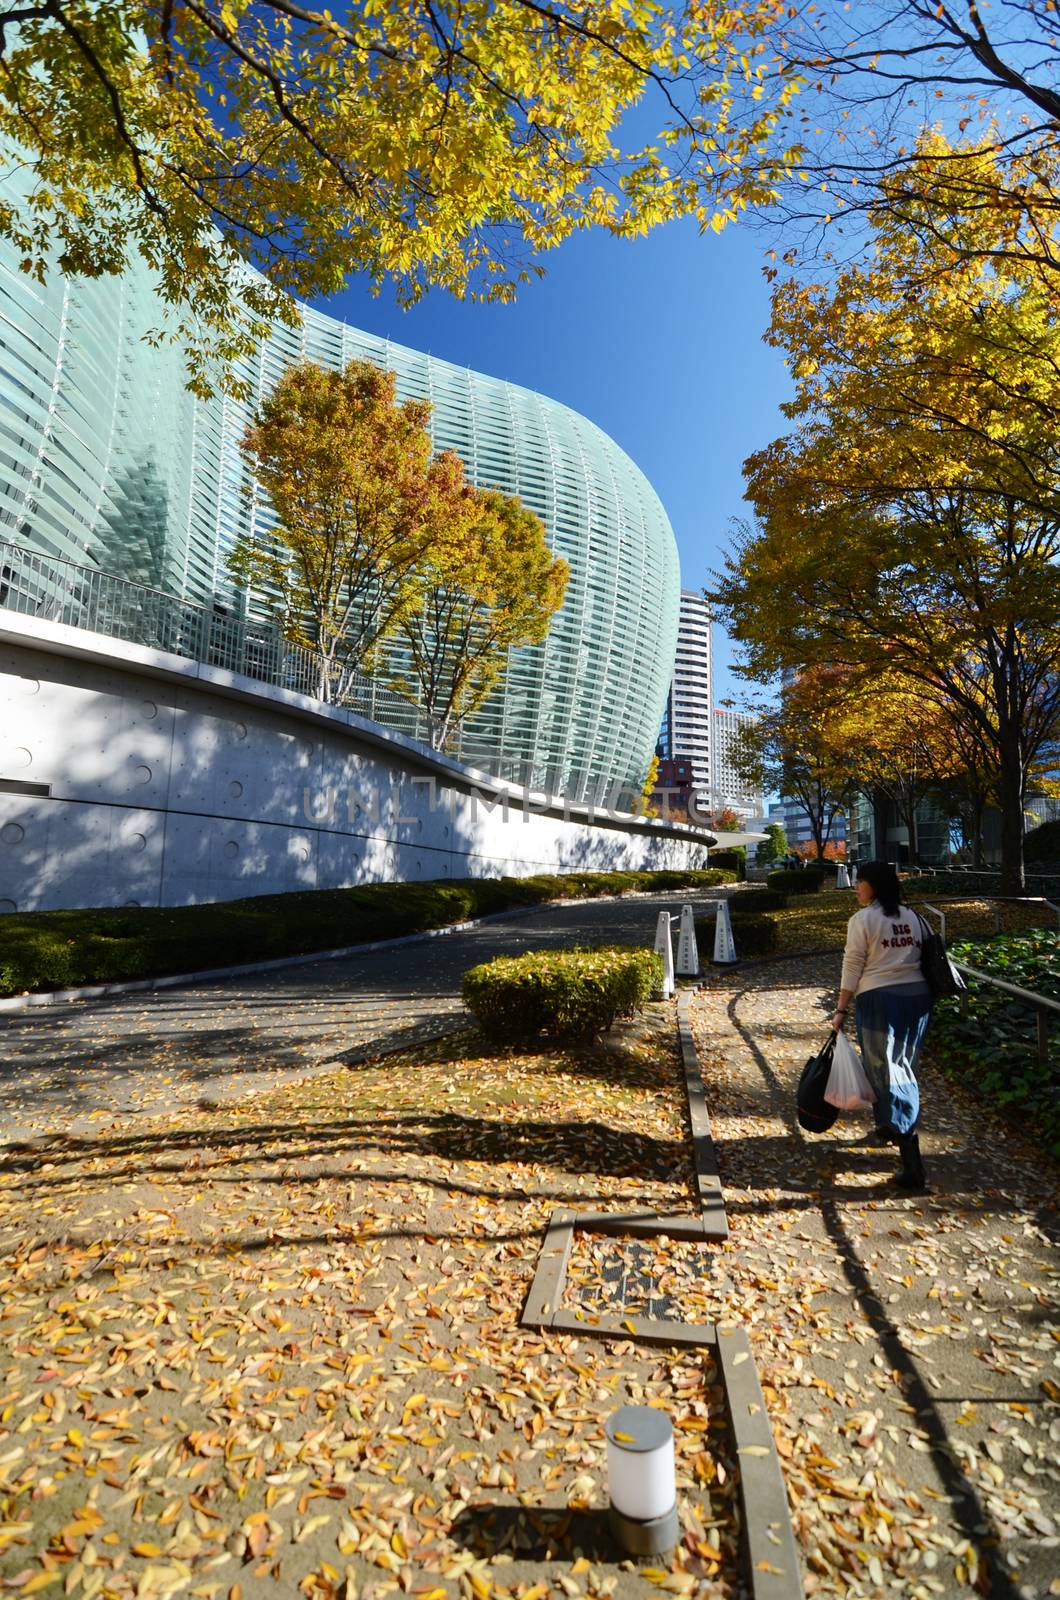 Tokyo, Japan - November 23, 2013: People visit National Art Center in Tokyo, Japan on November 23, 2013. The museum has an exhibition of 600 pieces, concentrating on 20th-century painting and modern arts.